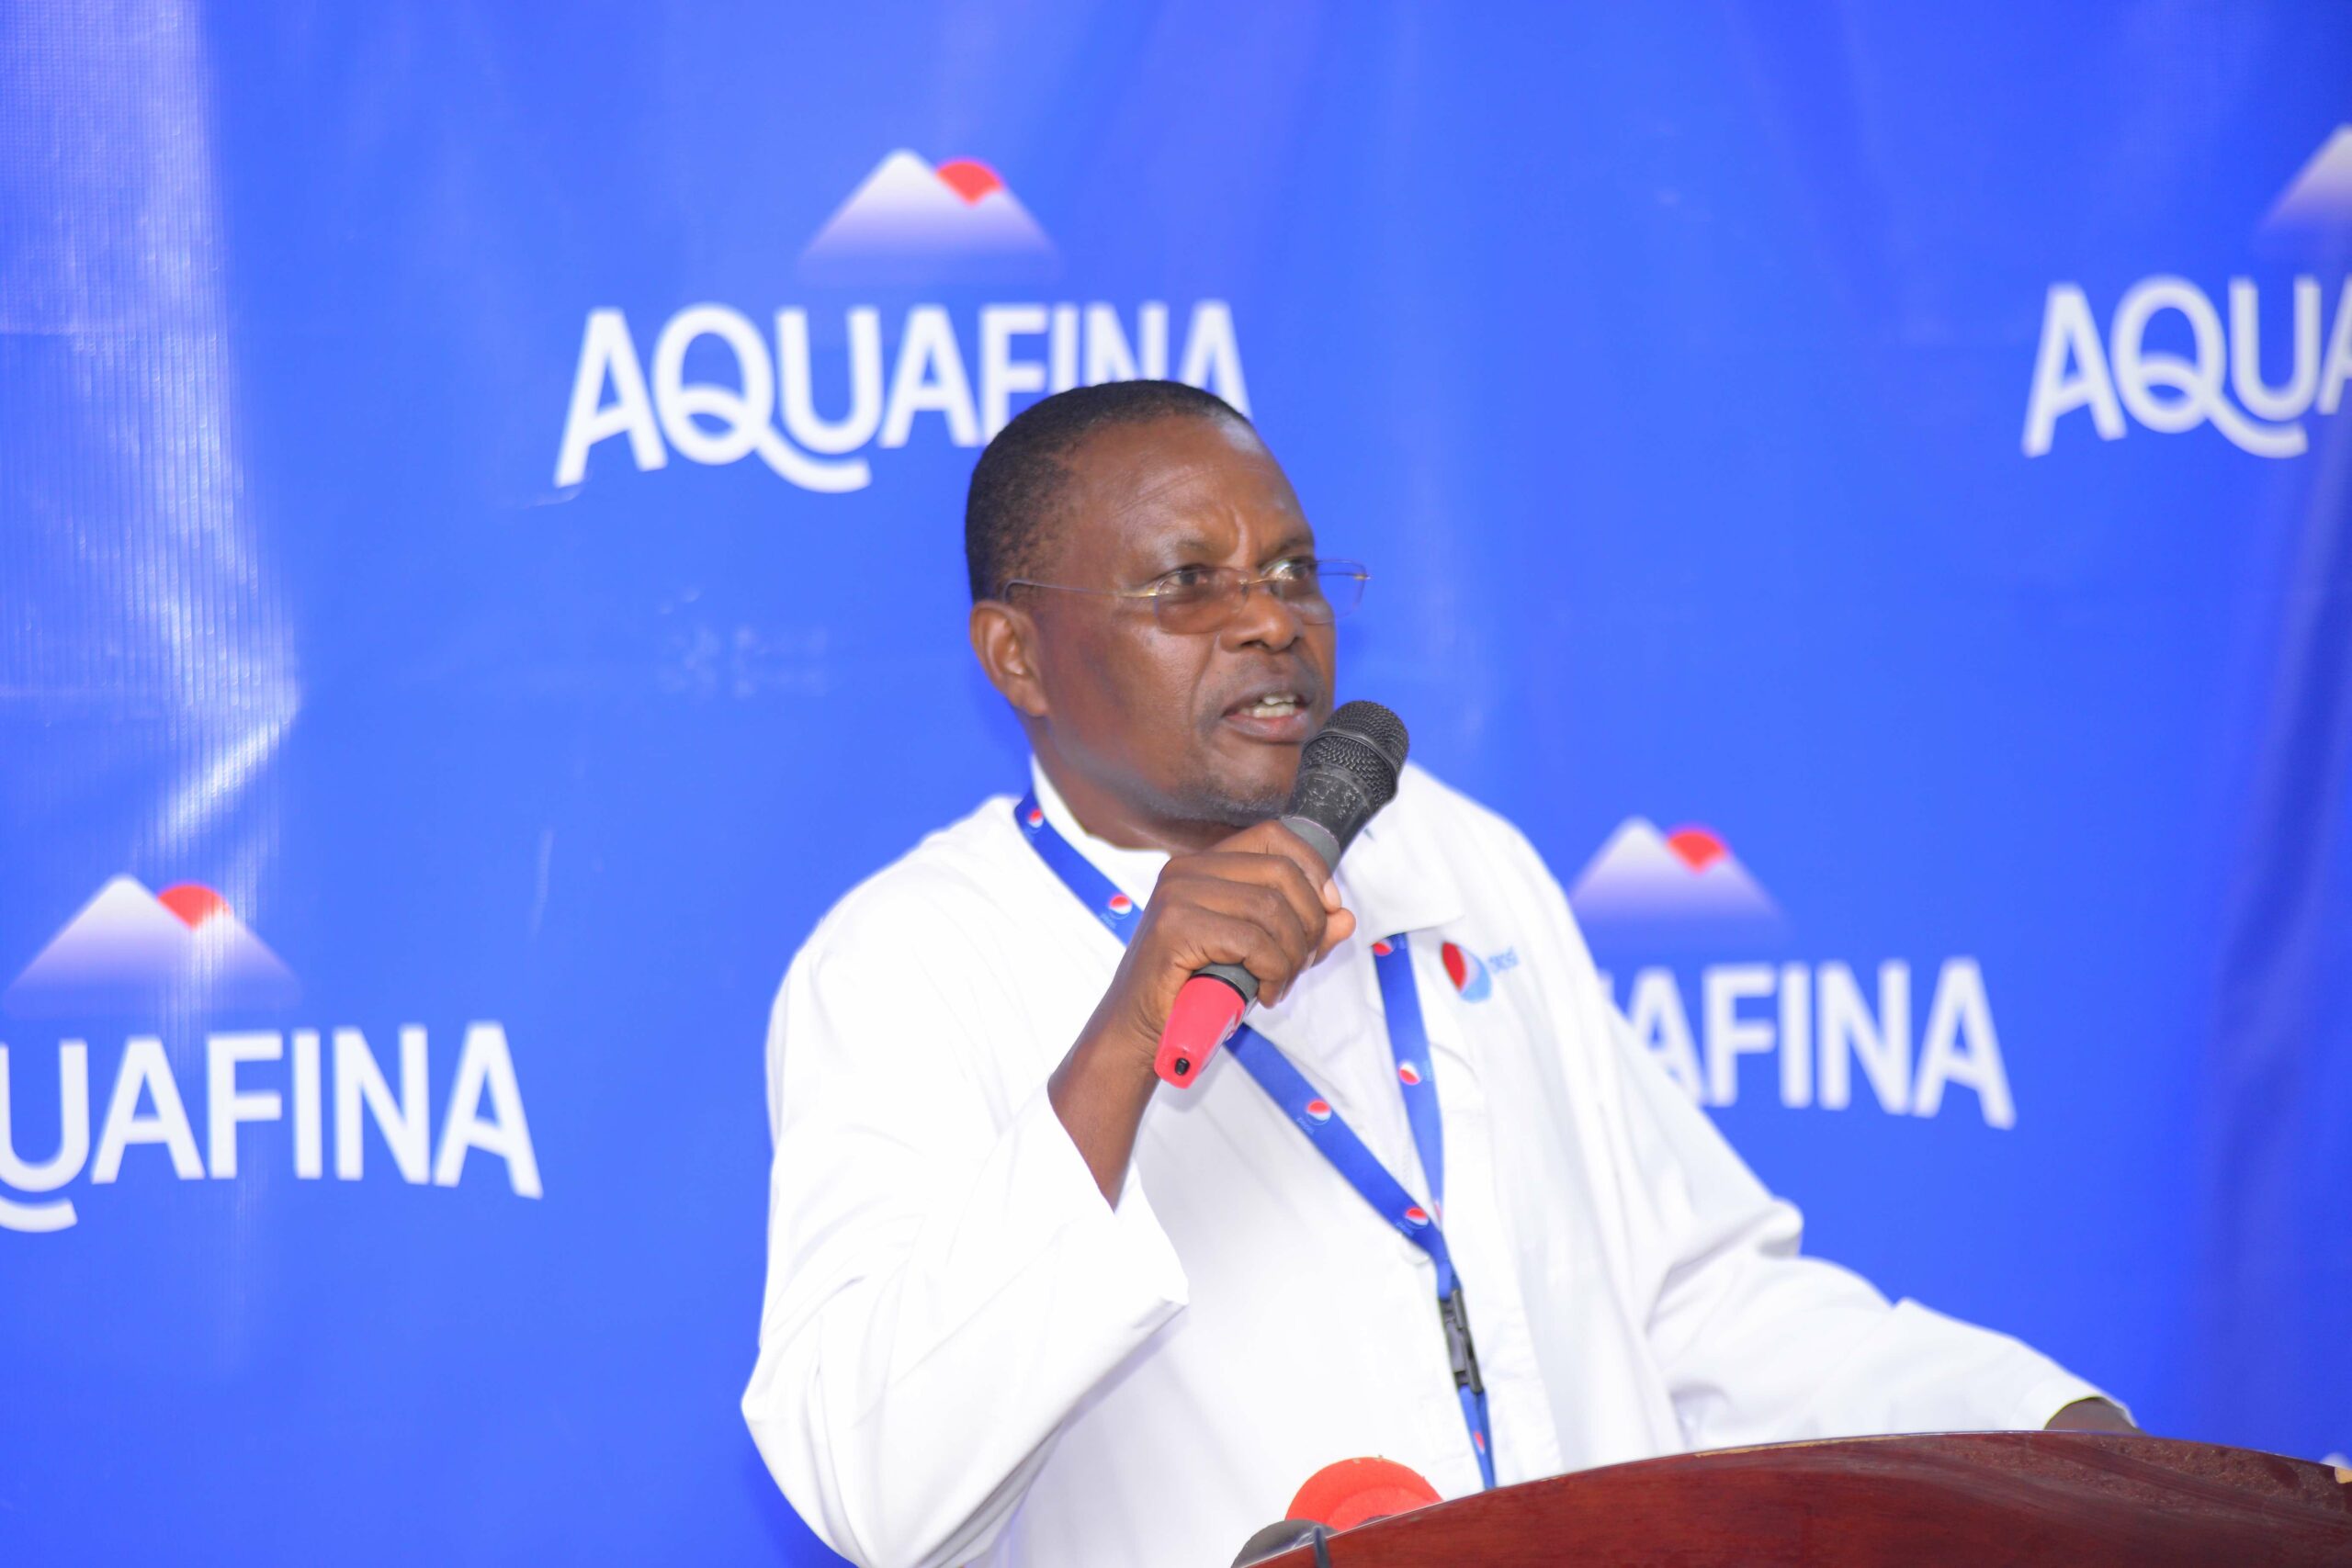 Crown Beverages banks on its UGX279 billion new plant to change fortunes in the bottled water market, as it launches Aquafina, an enriched water brand